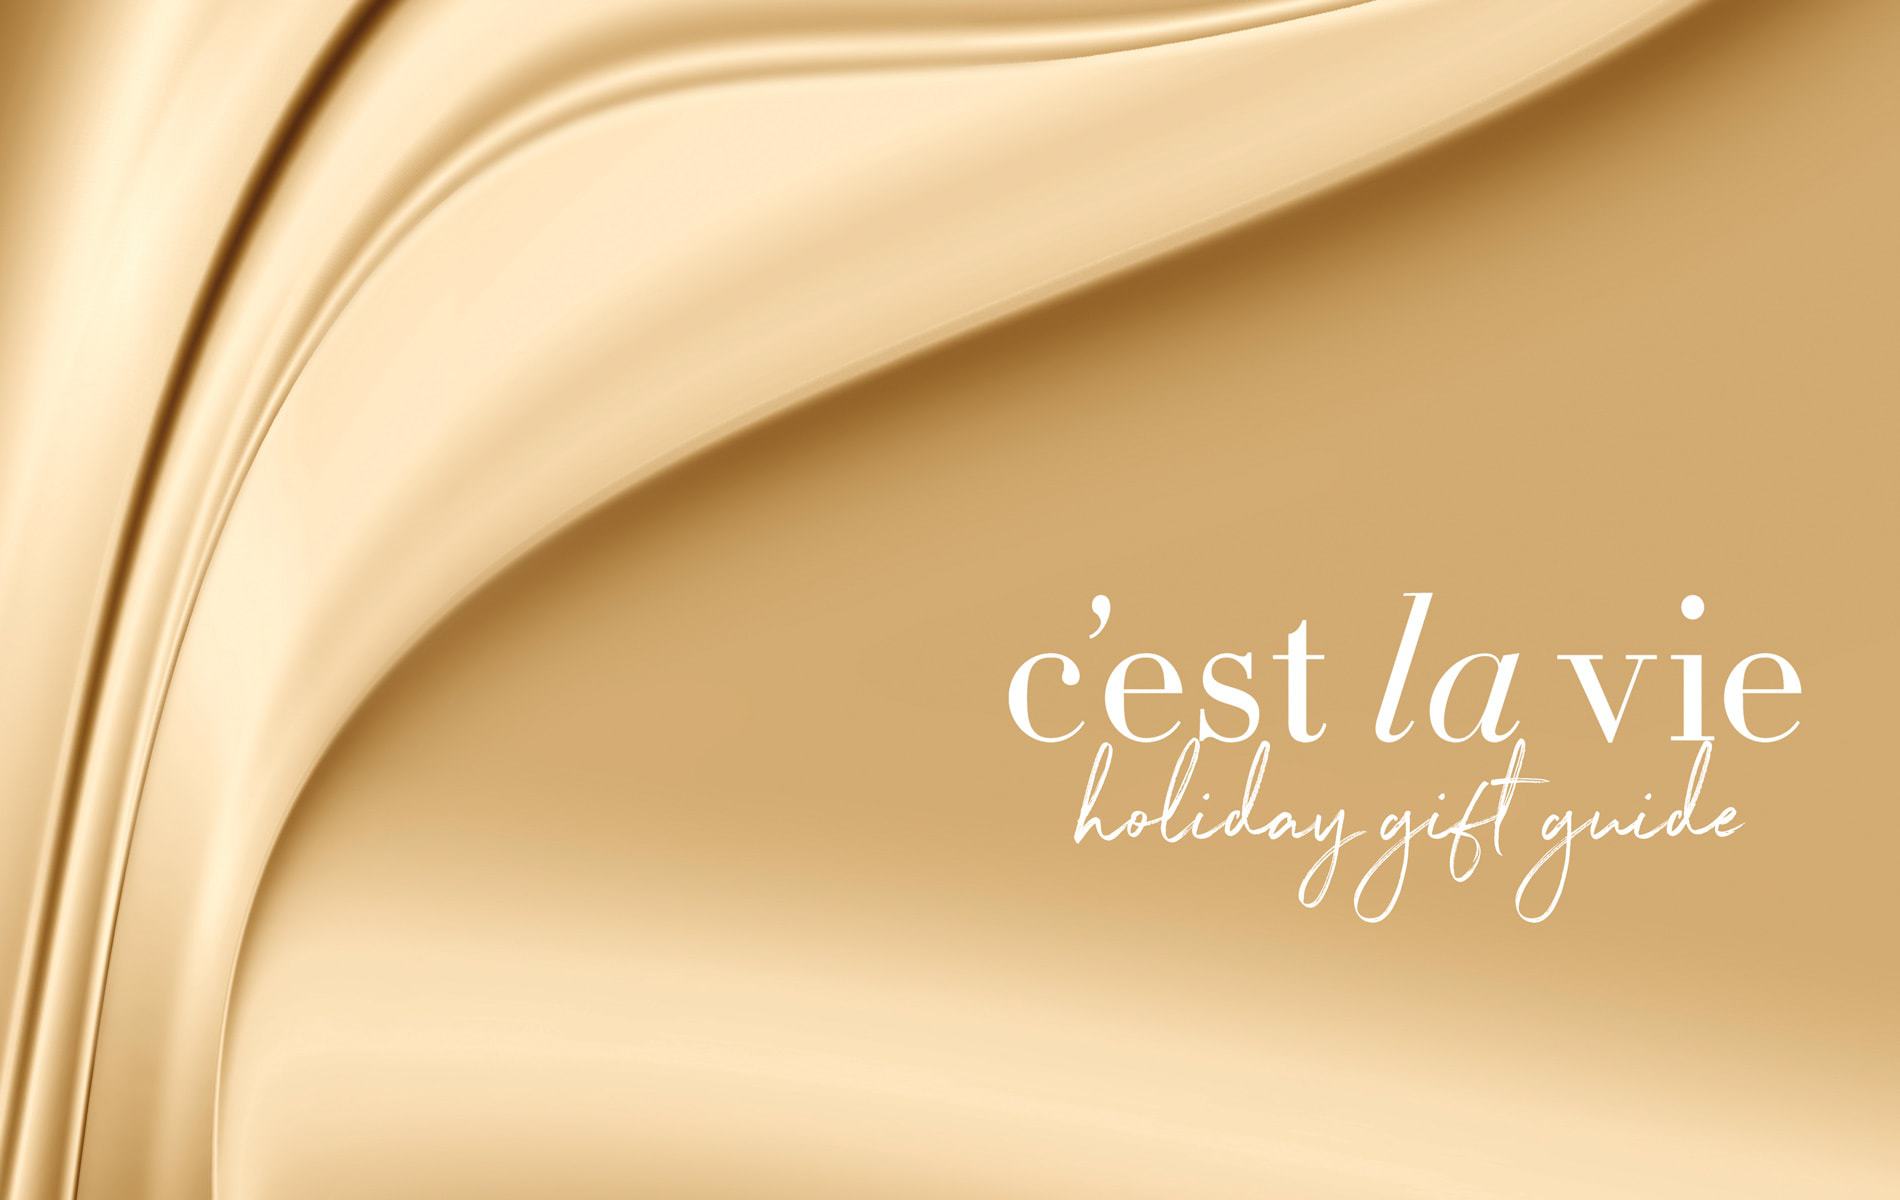 cest la vie holiday gift guide, best gifts of 2017